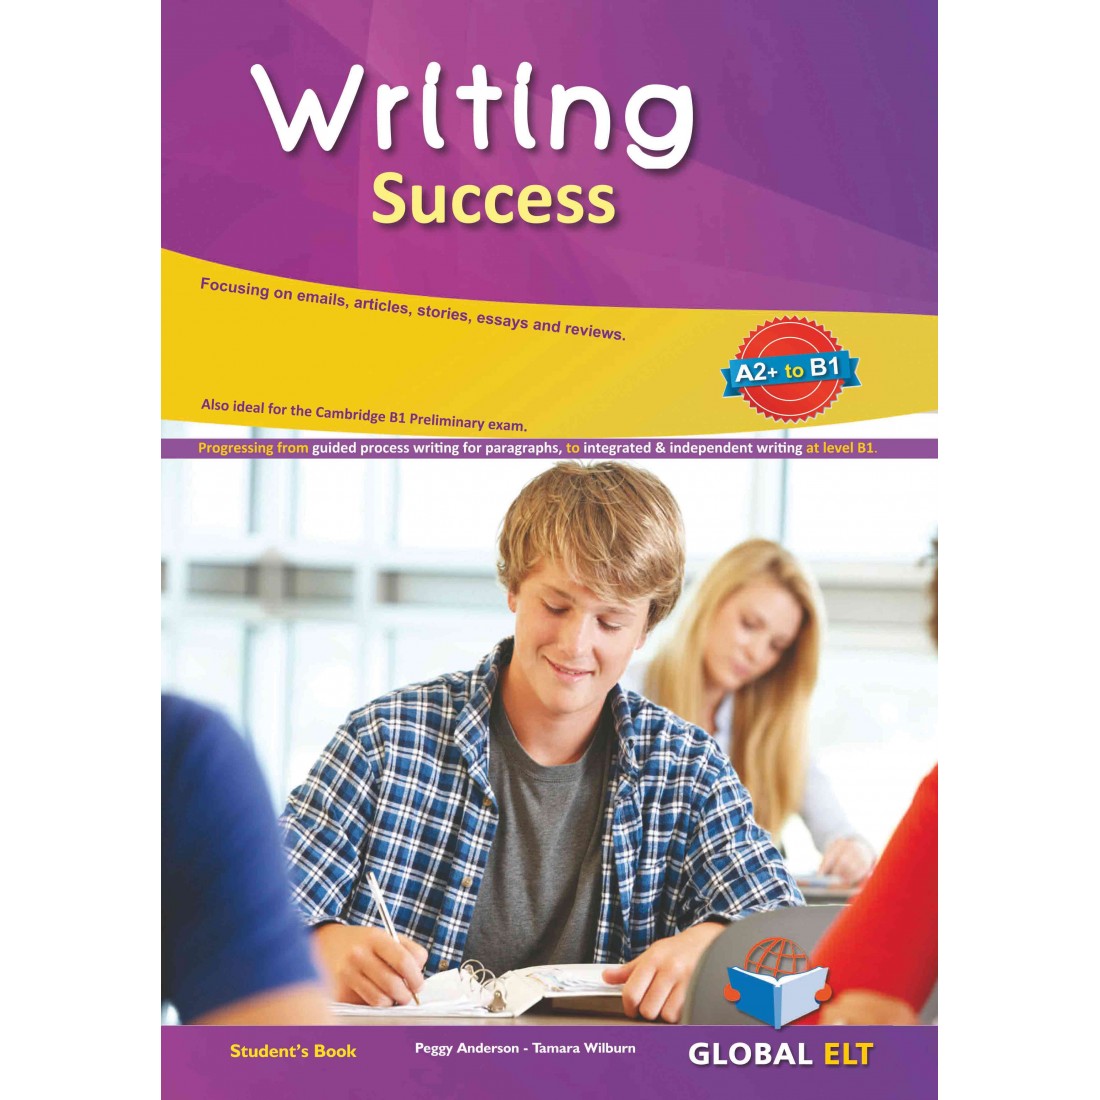 Student's book a2+. CPE Practice Tests 4. Think b1 student's book 2. B1 Business English student book. More student book